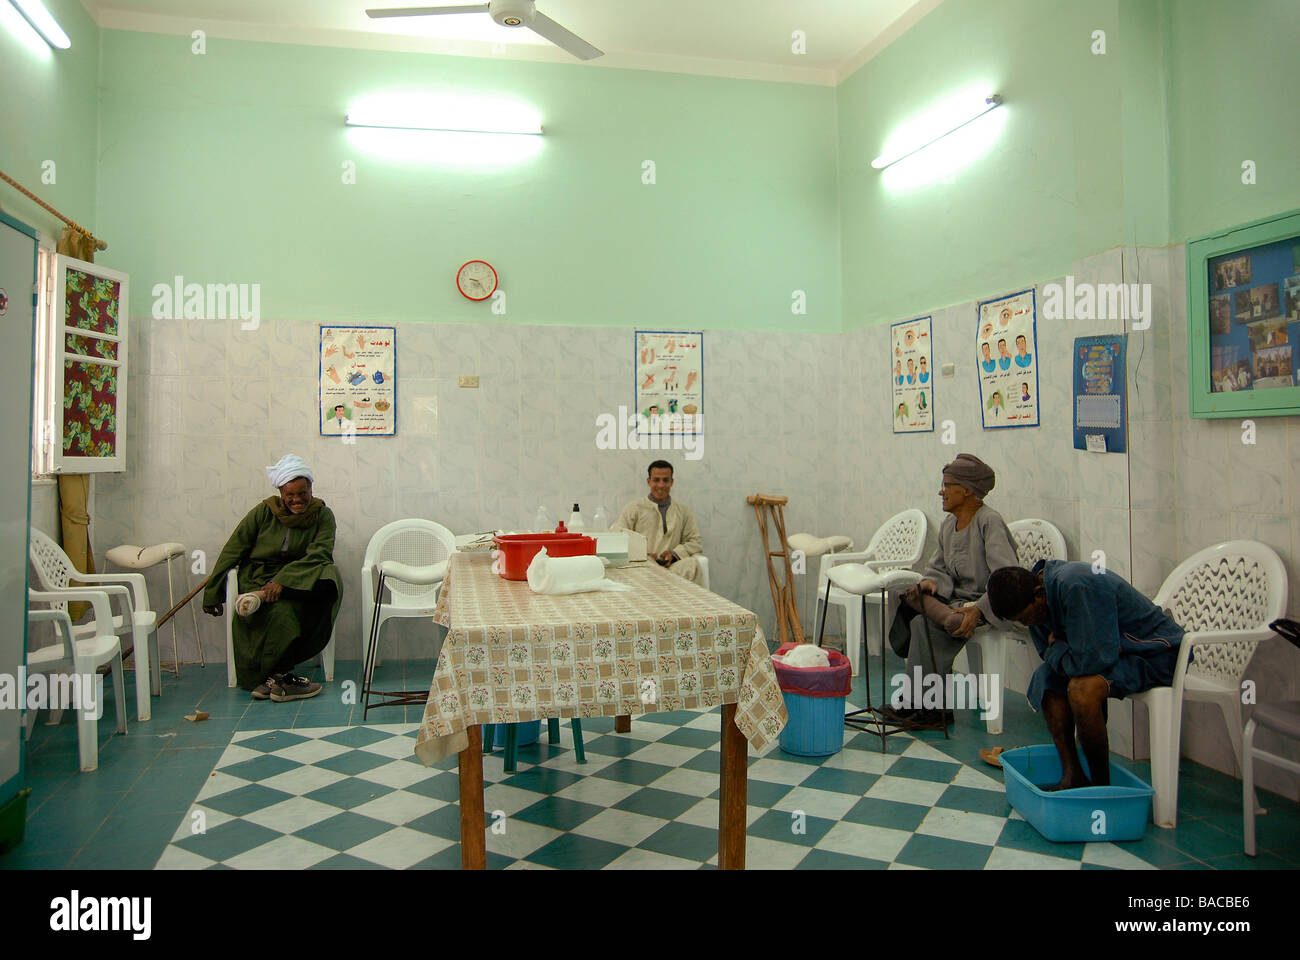 Lepers waiting for their medical treatment in Egypt's biggest leprosy hospital. Many patients have open wounds. Stock Photo